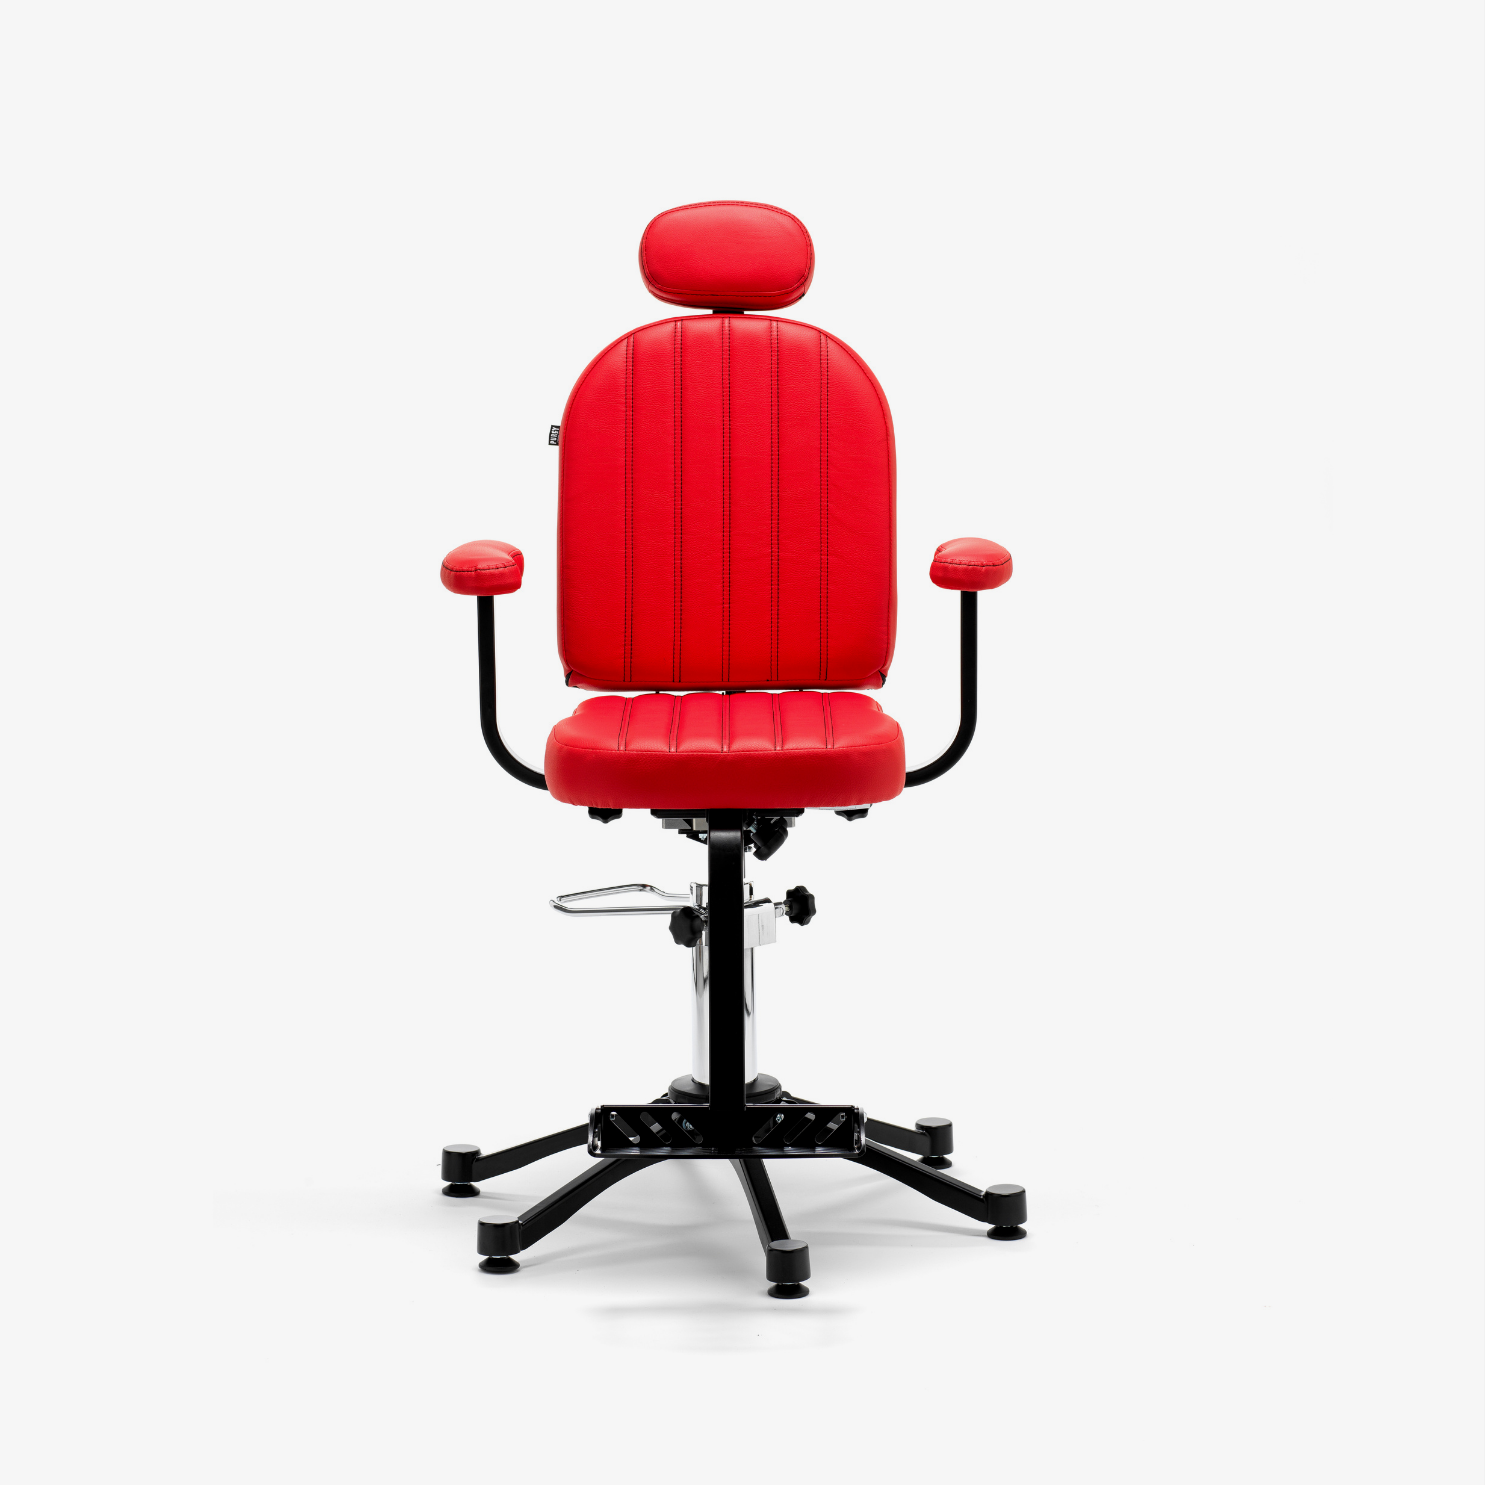 The Purcy Chair - Red